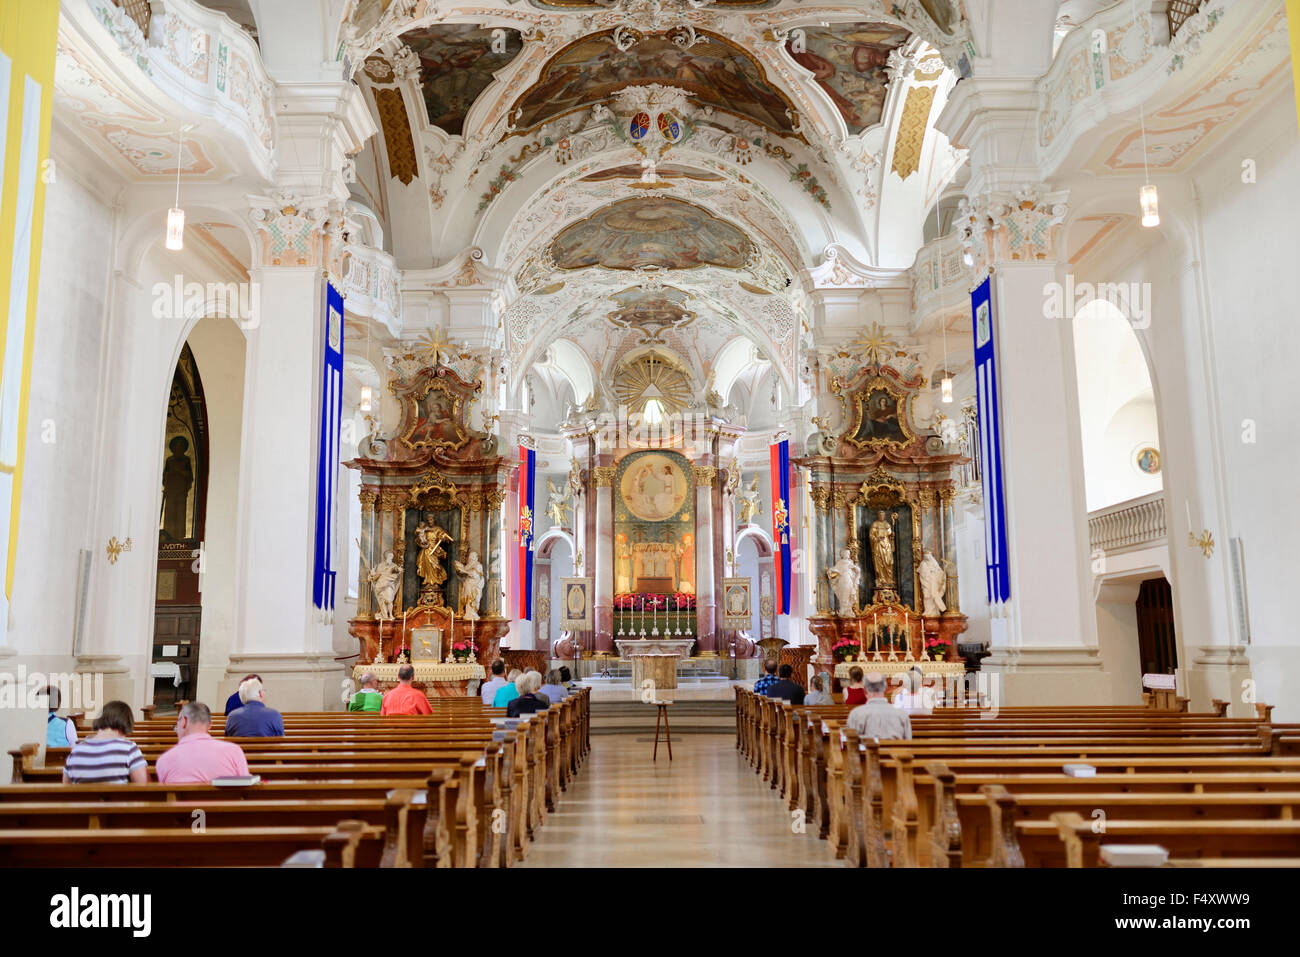 Interior with the altar and choir area, Benedictine Beuron Archabbey in the Danube Valley, Beuron, Baden-Württemberg, Germany Stock Photo